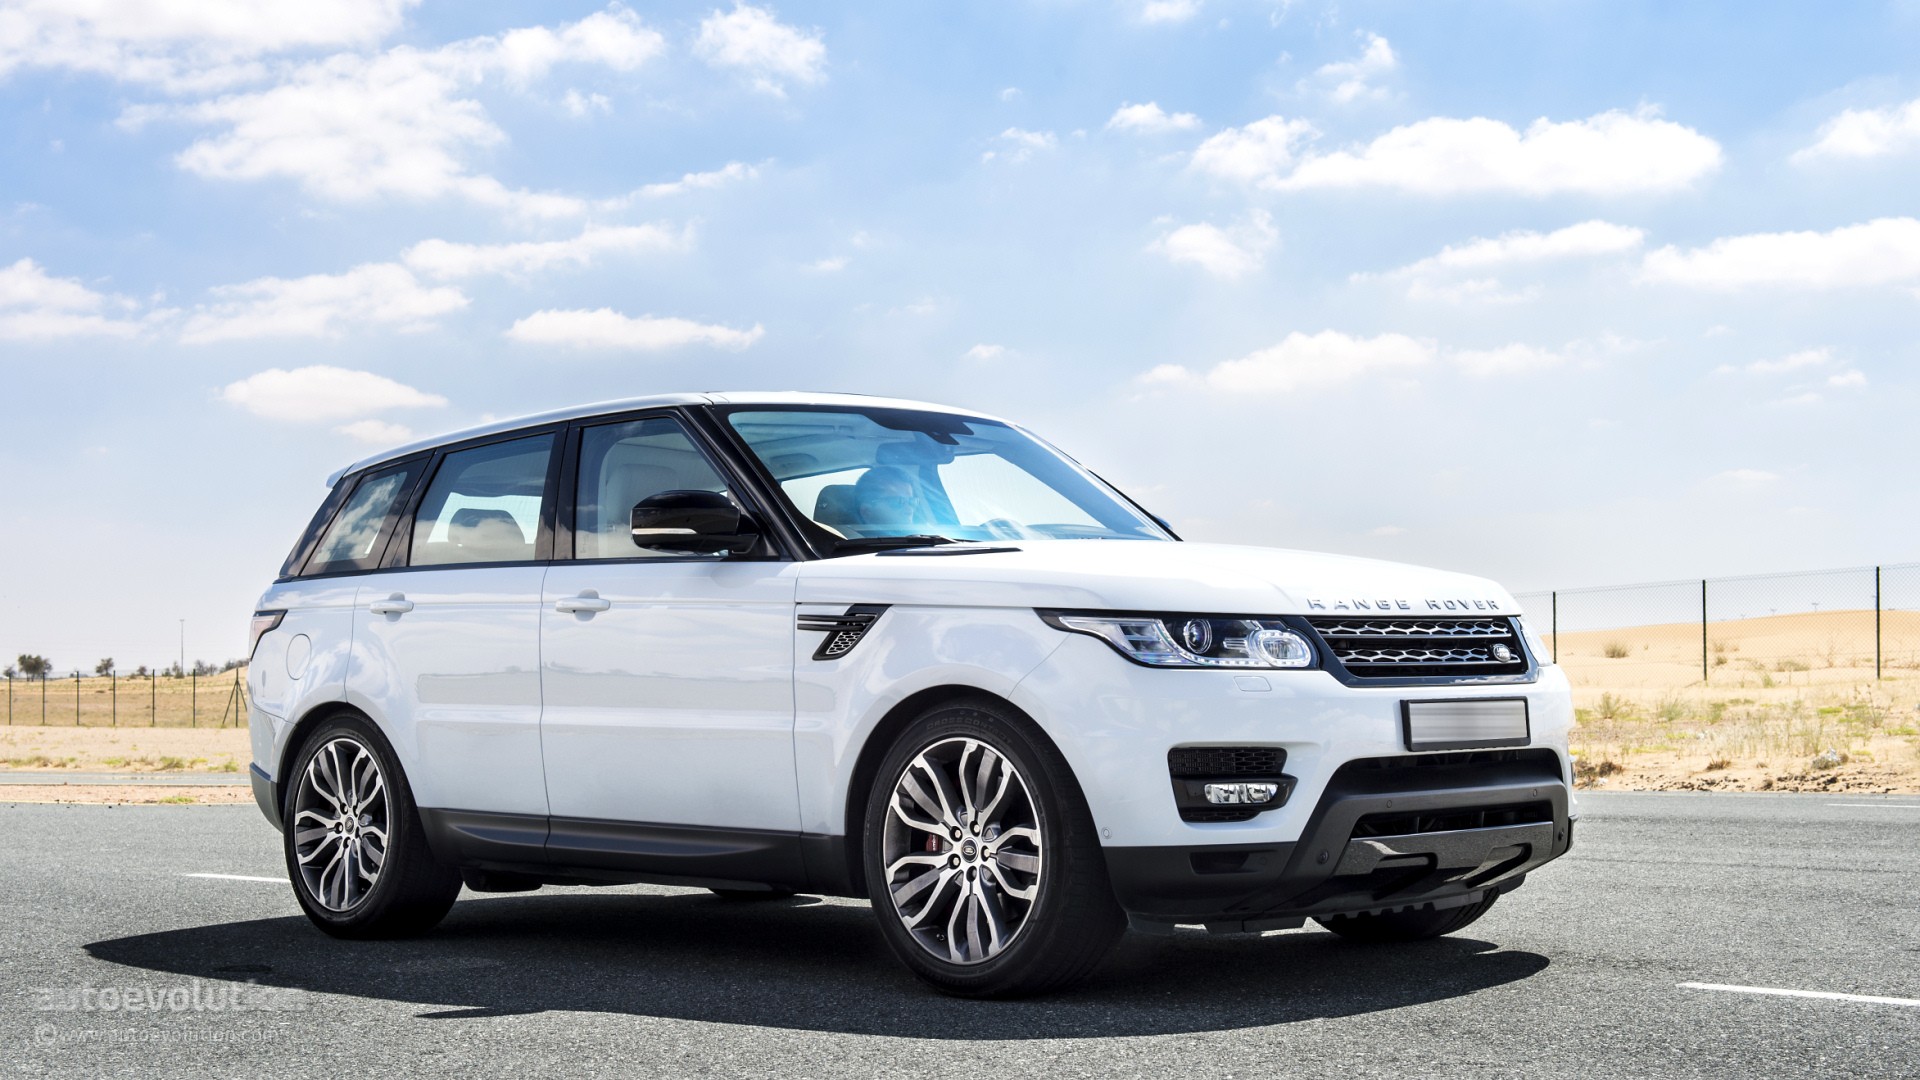 2015 Range Rover Sport Supercharged Review (Page 2 ...